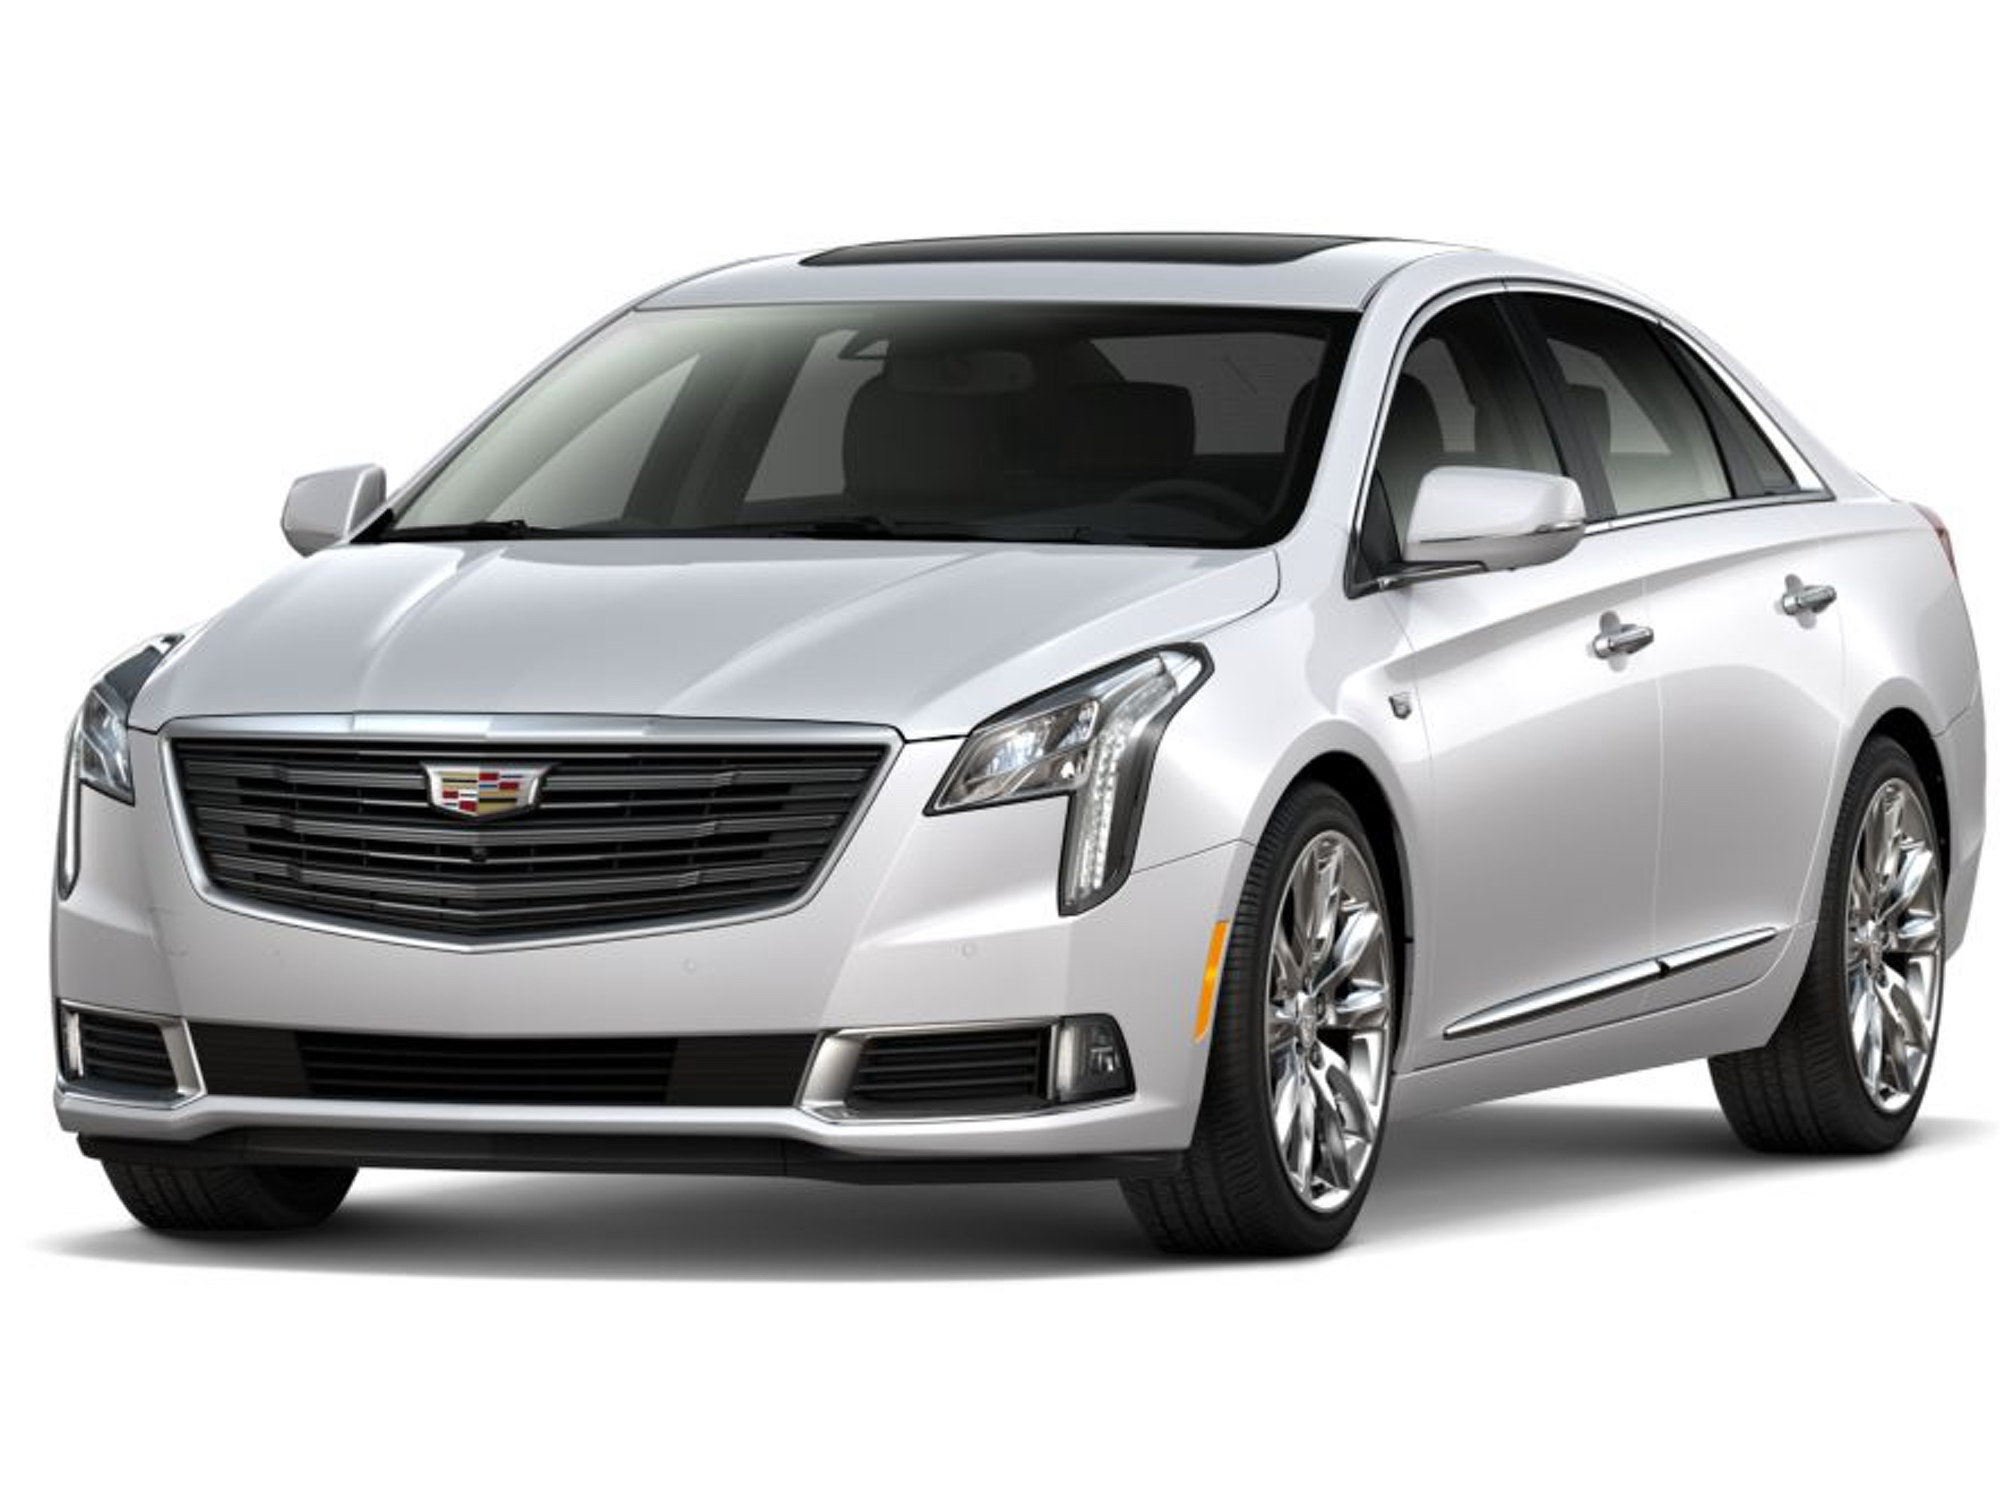 2019 Cadillac XTS V-Sport Colors | GM Authority